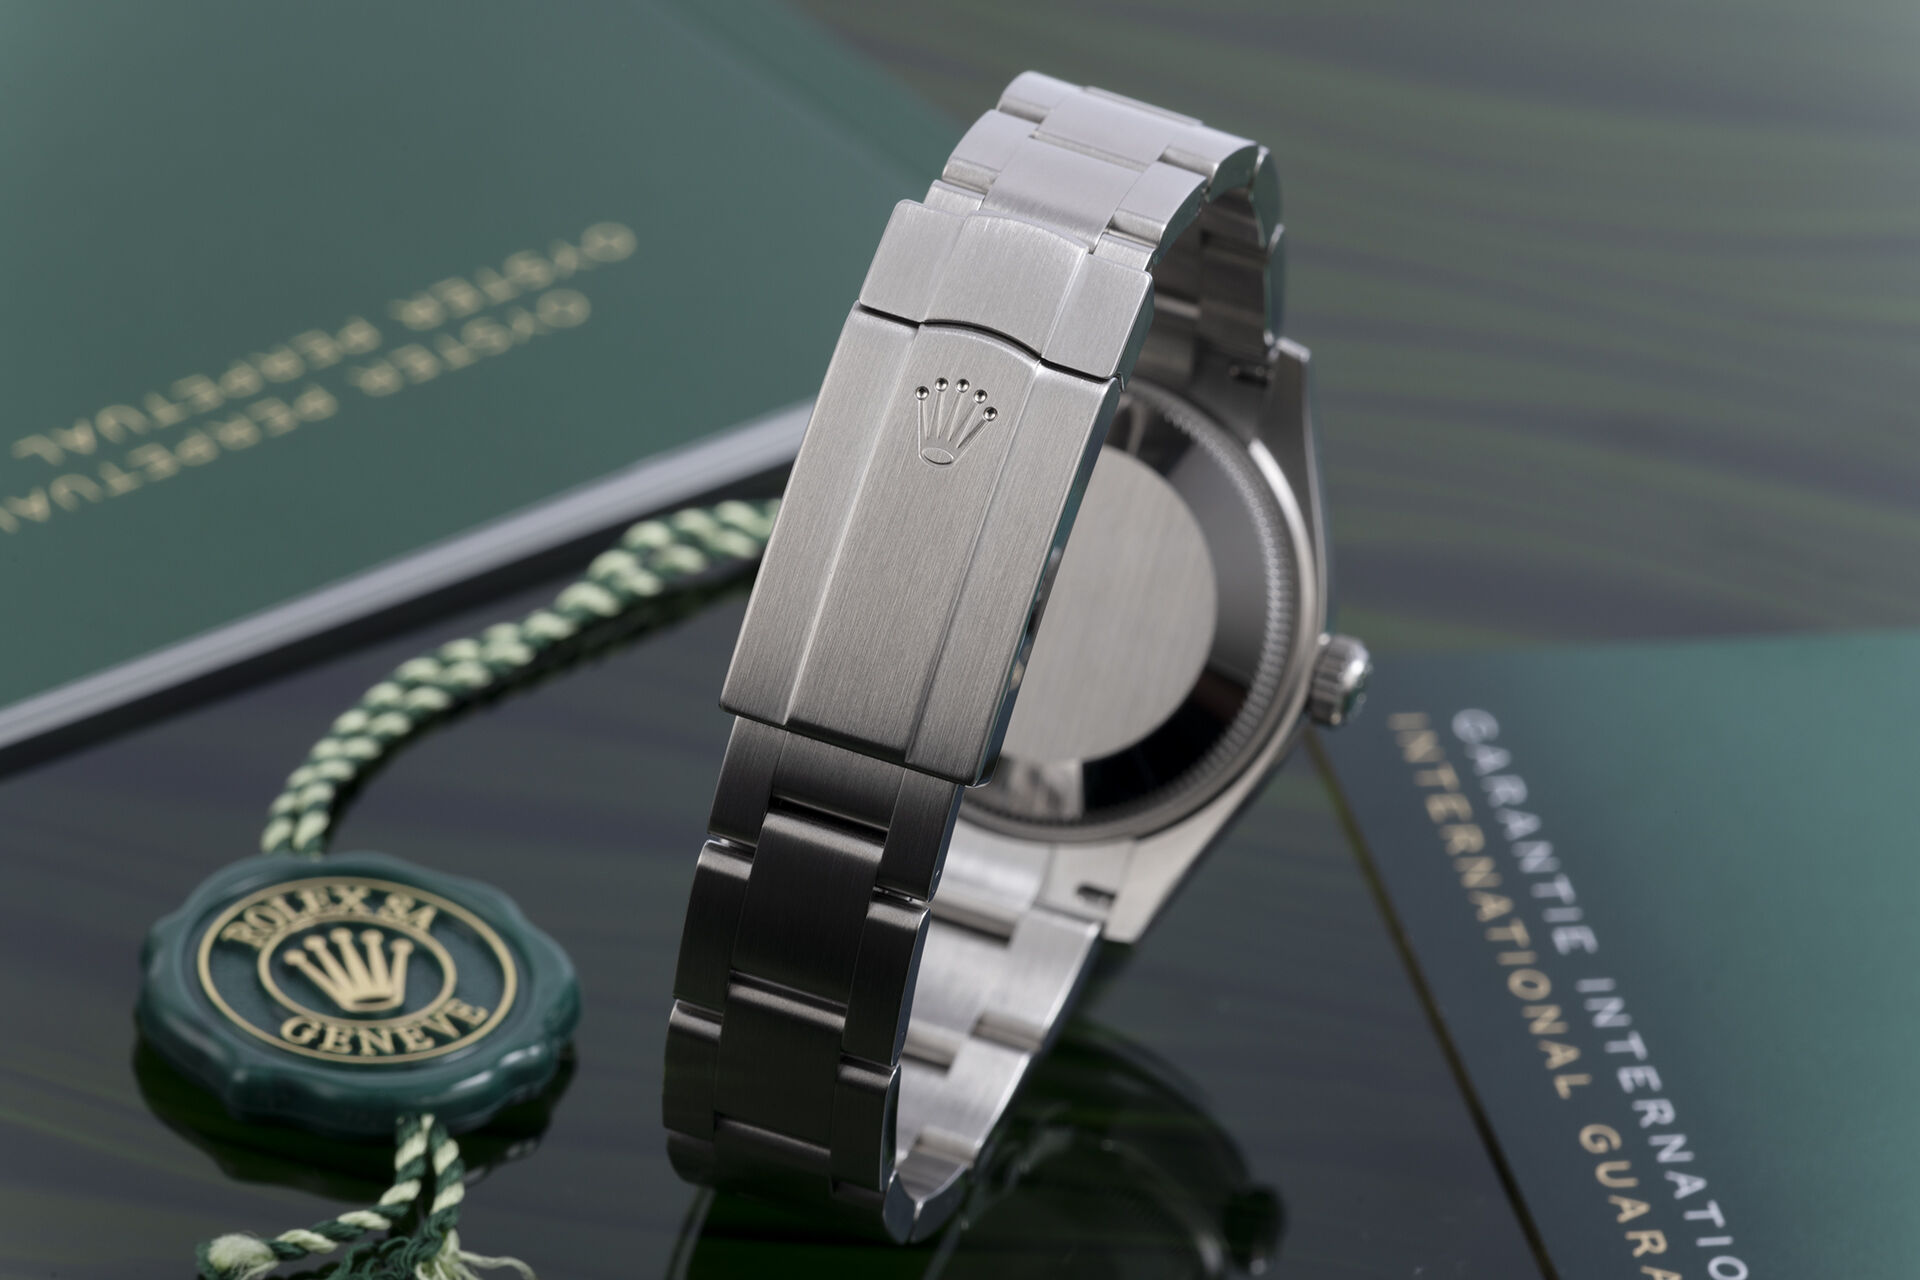 ref 277200 | Latest Release - Green Dial | Rolex Oyster Perpetual